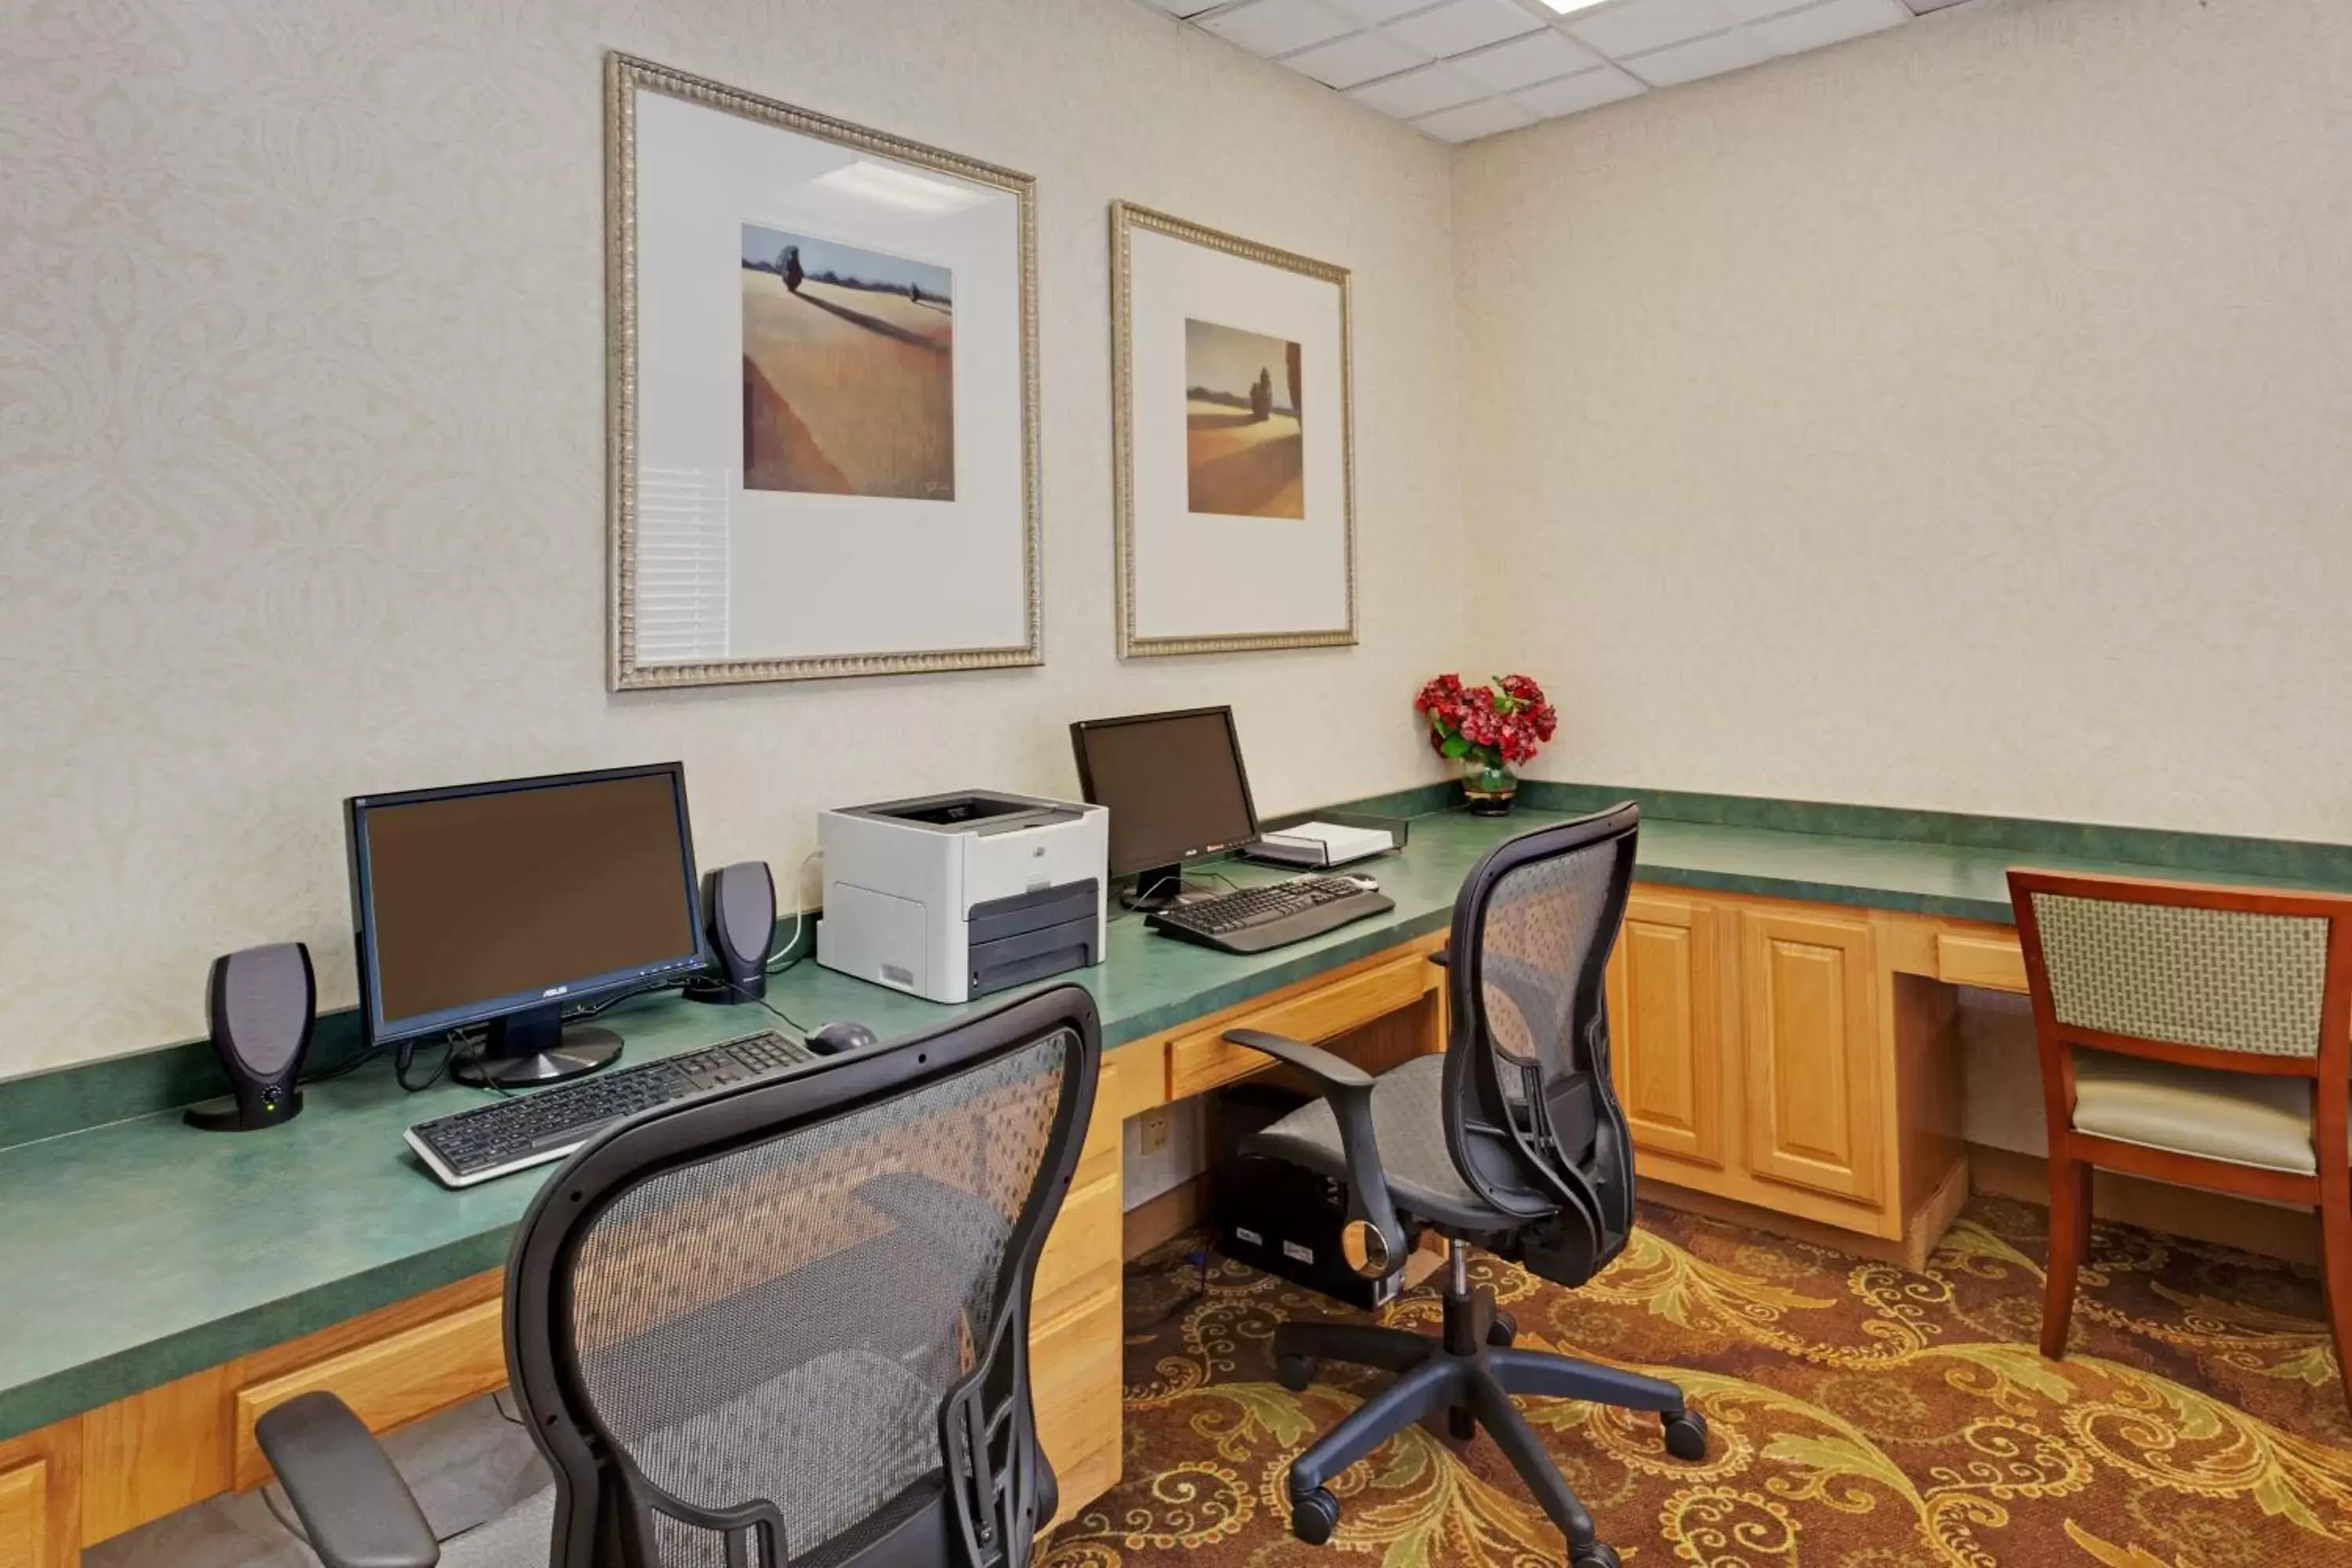 Business facilities in Country Inn & Suites by Radisson, Bel Air/Aberdeen, MD